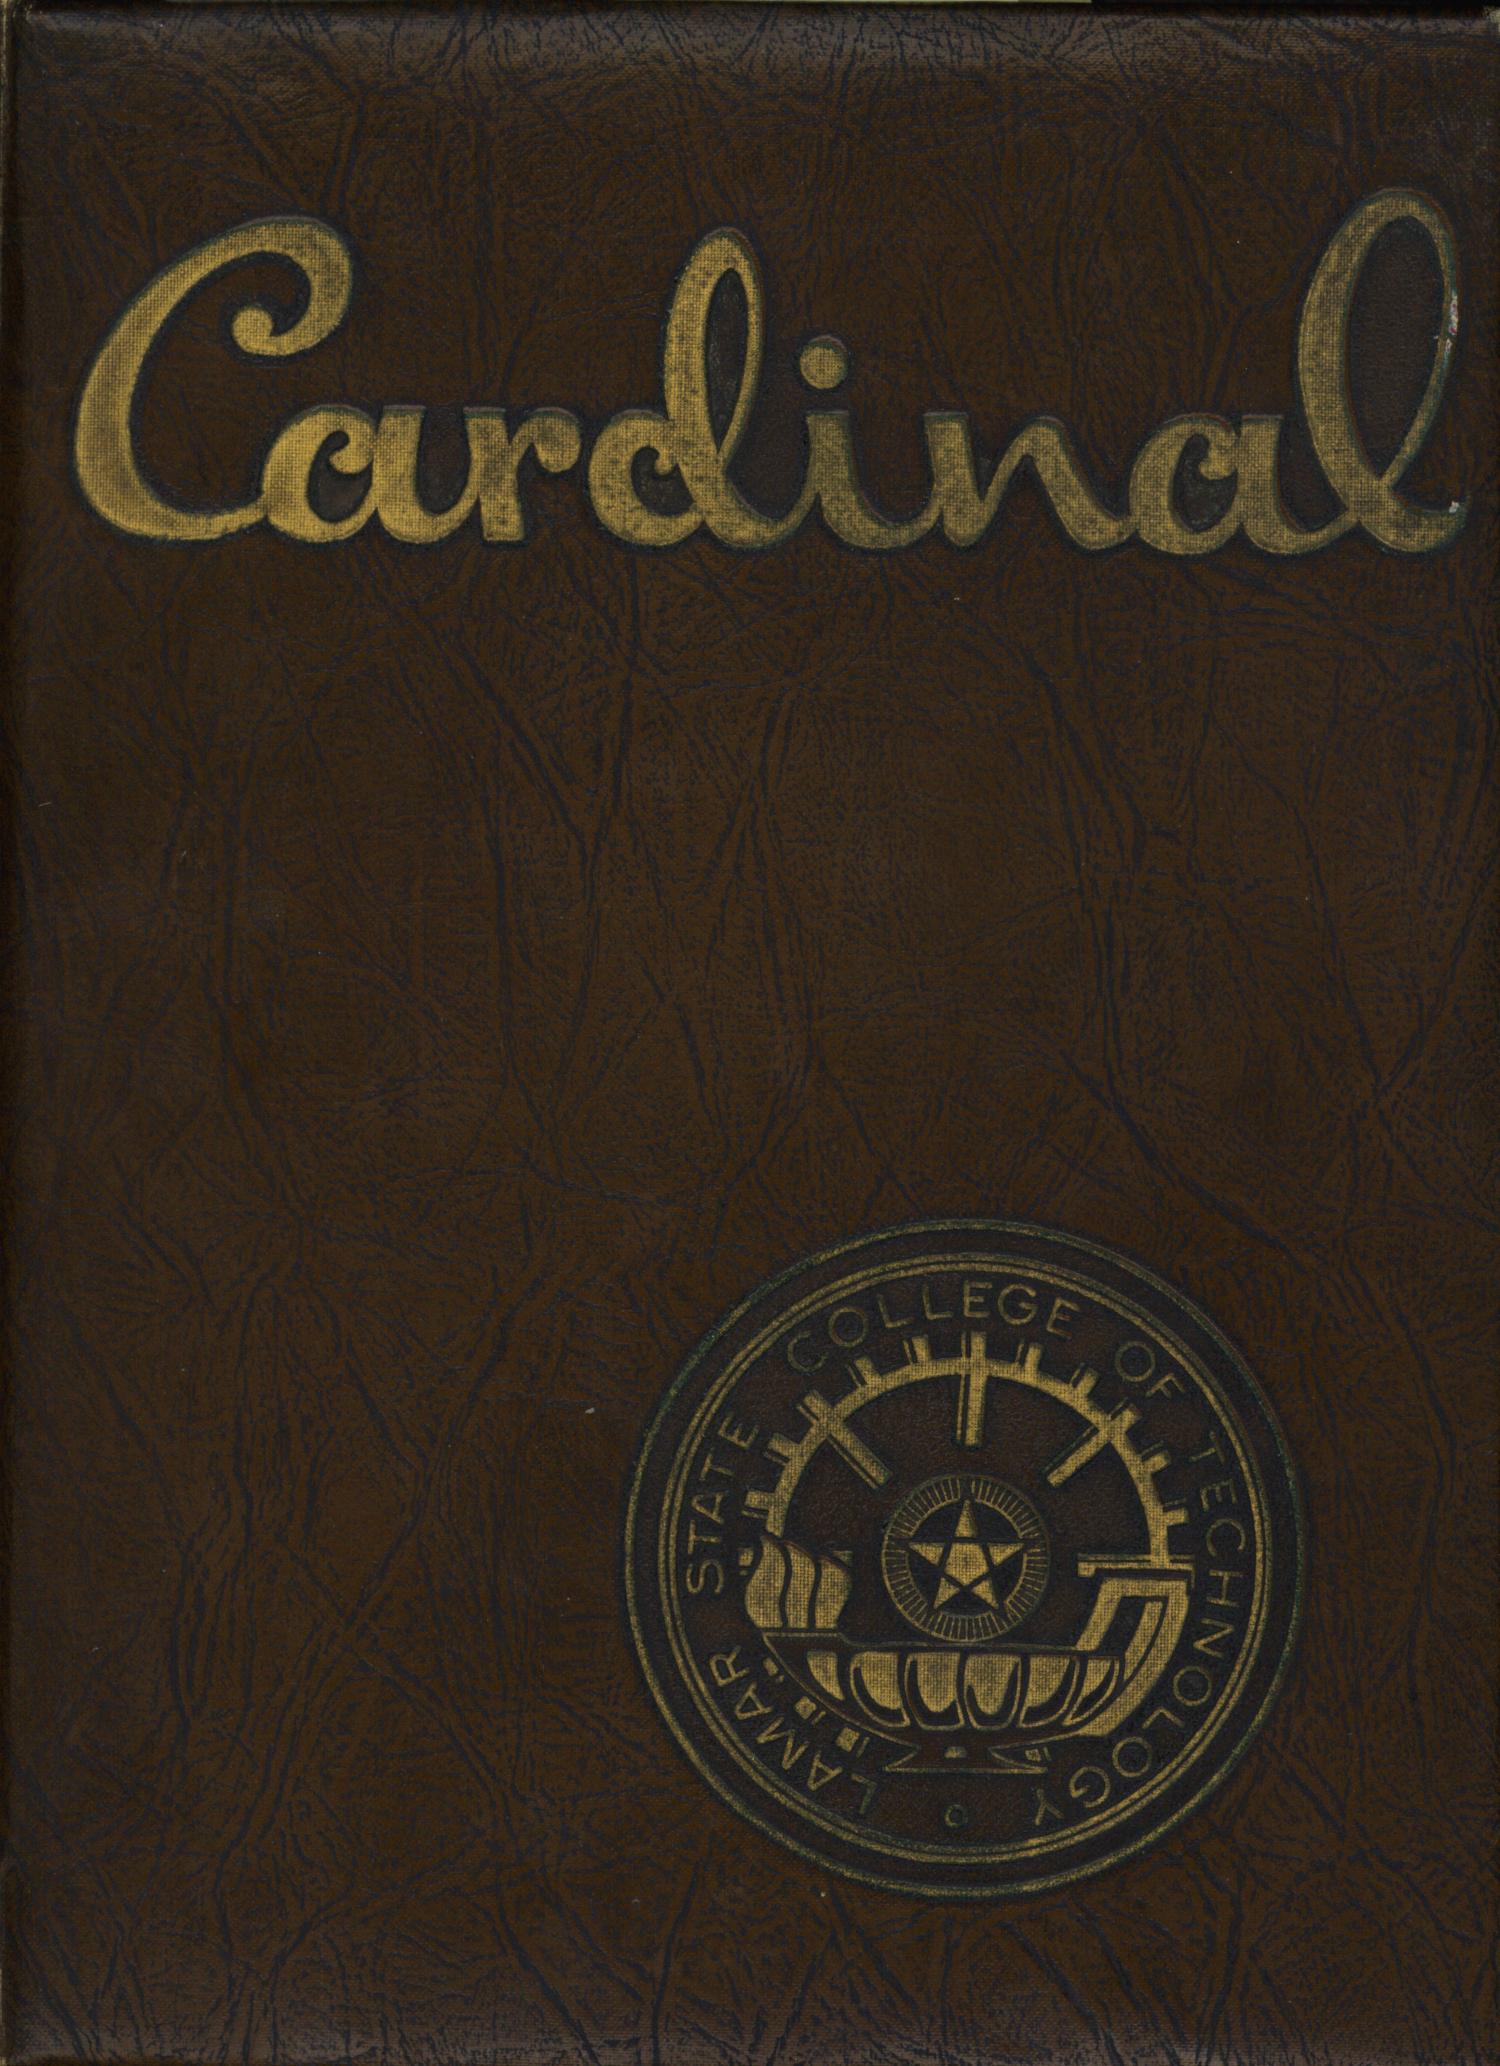 The Cardinal, Yearbook of Lamar State College of Technology, 1952
                                                
                                                    Front Cover
                                                